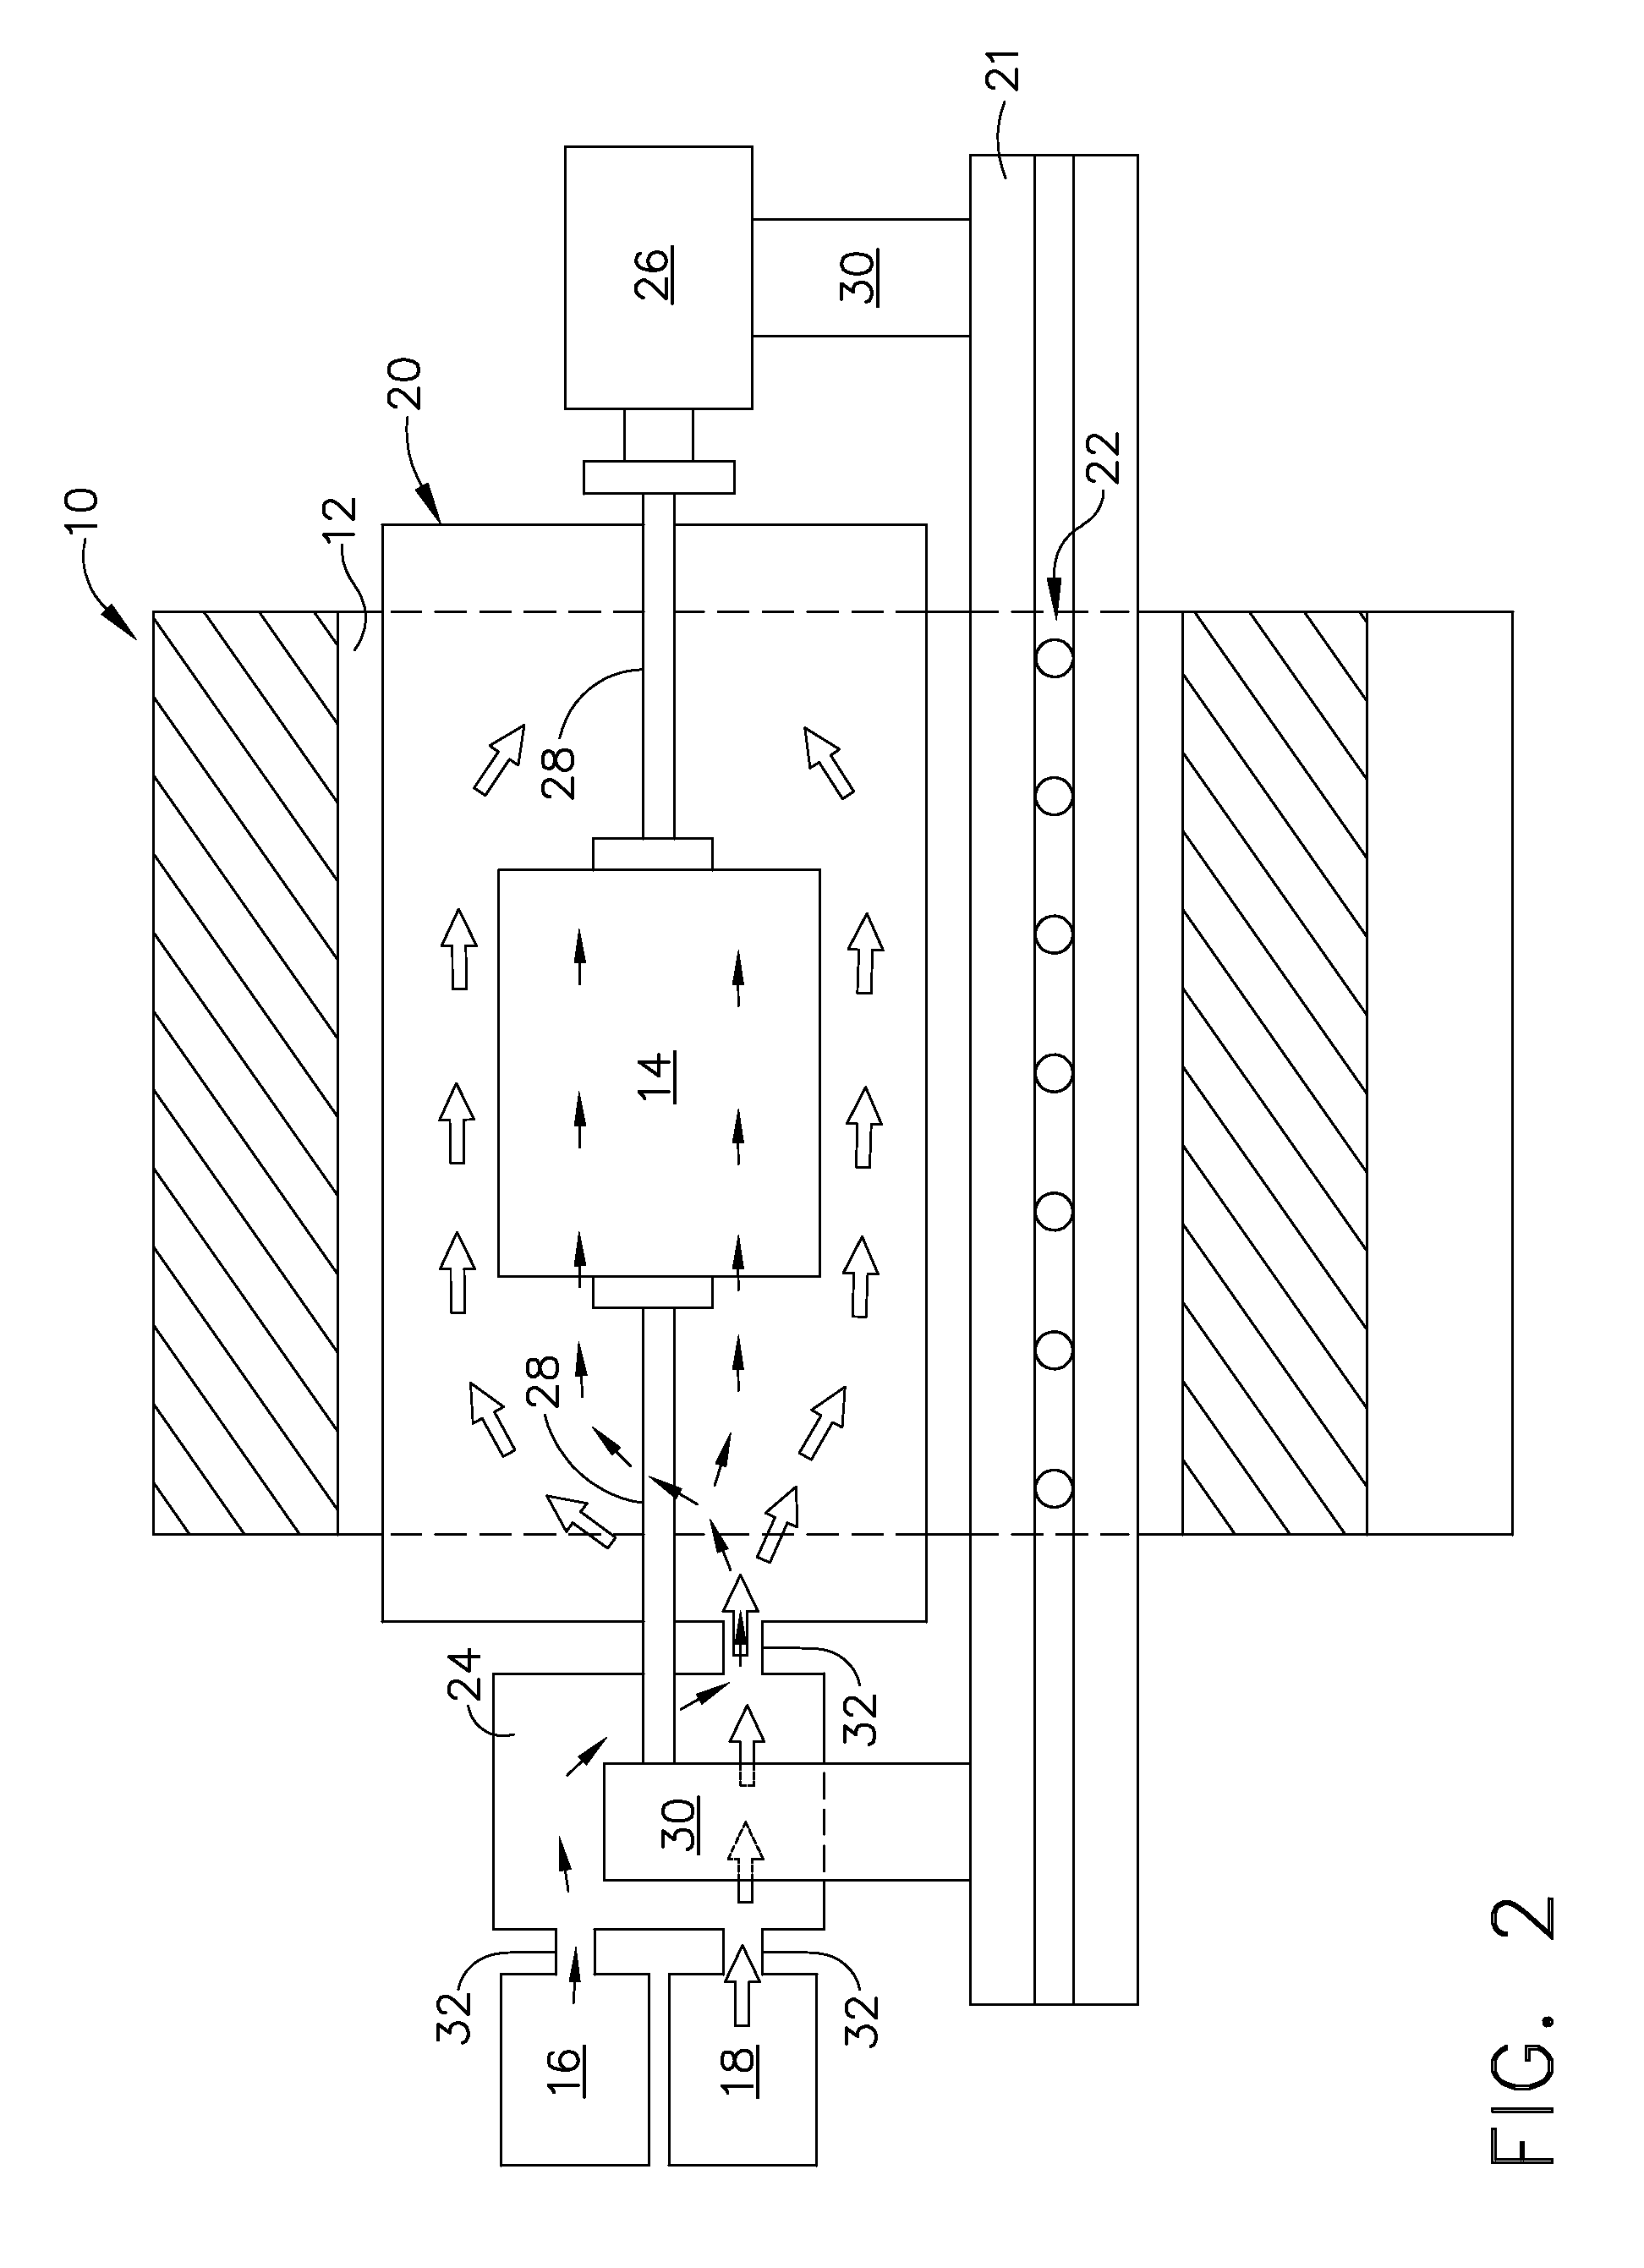 Methods for optimizing parameters of gas turbine engine components